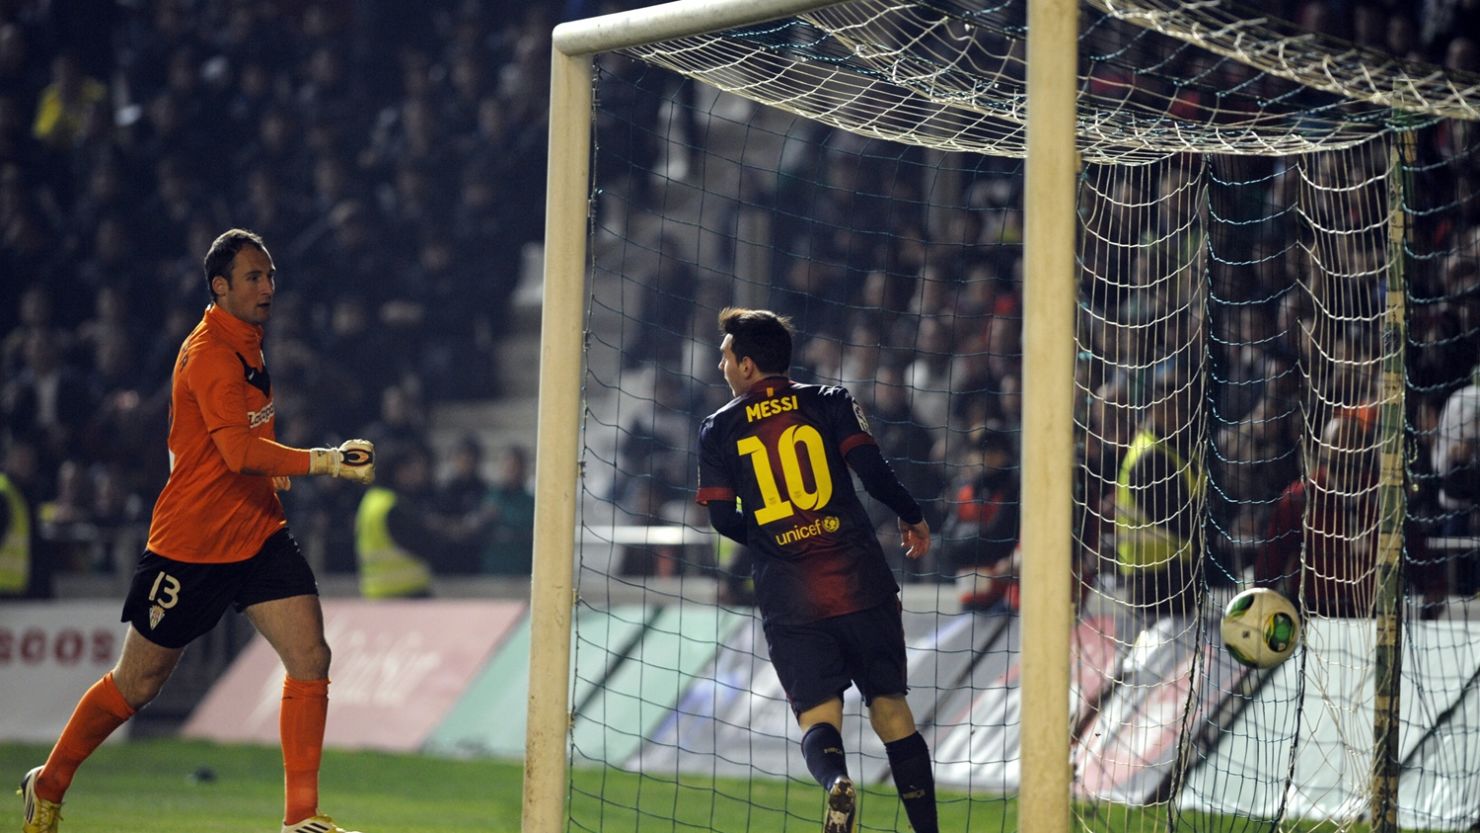 Leo Messi took his tally to 88 for 2012 after netting twice in Barcelona's Copa del Rey victory at Cordoba.